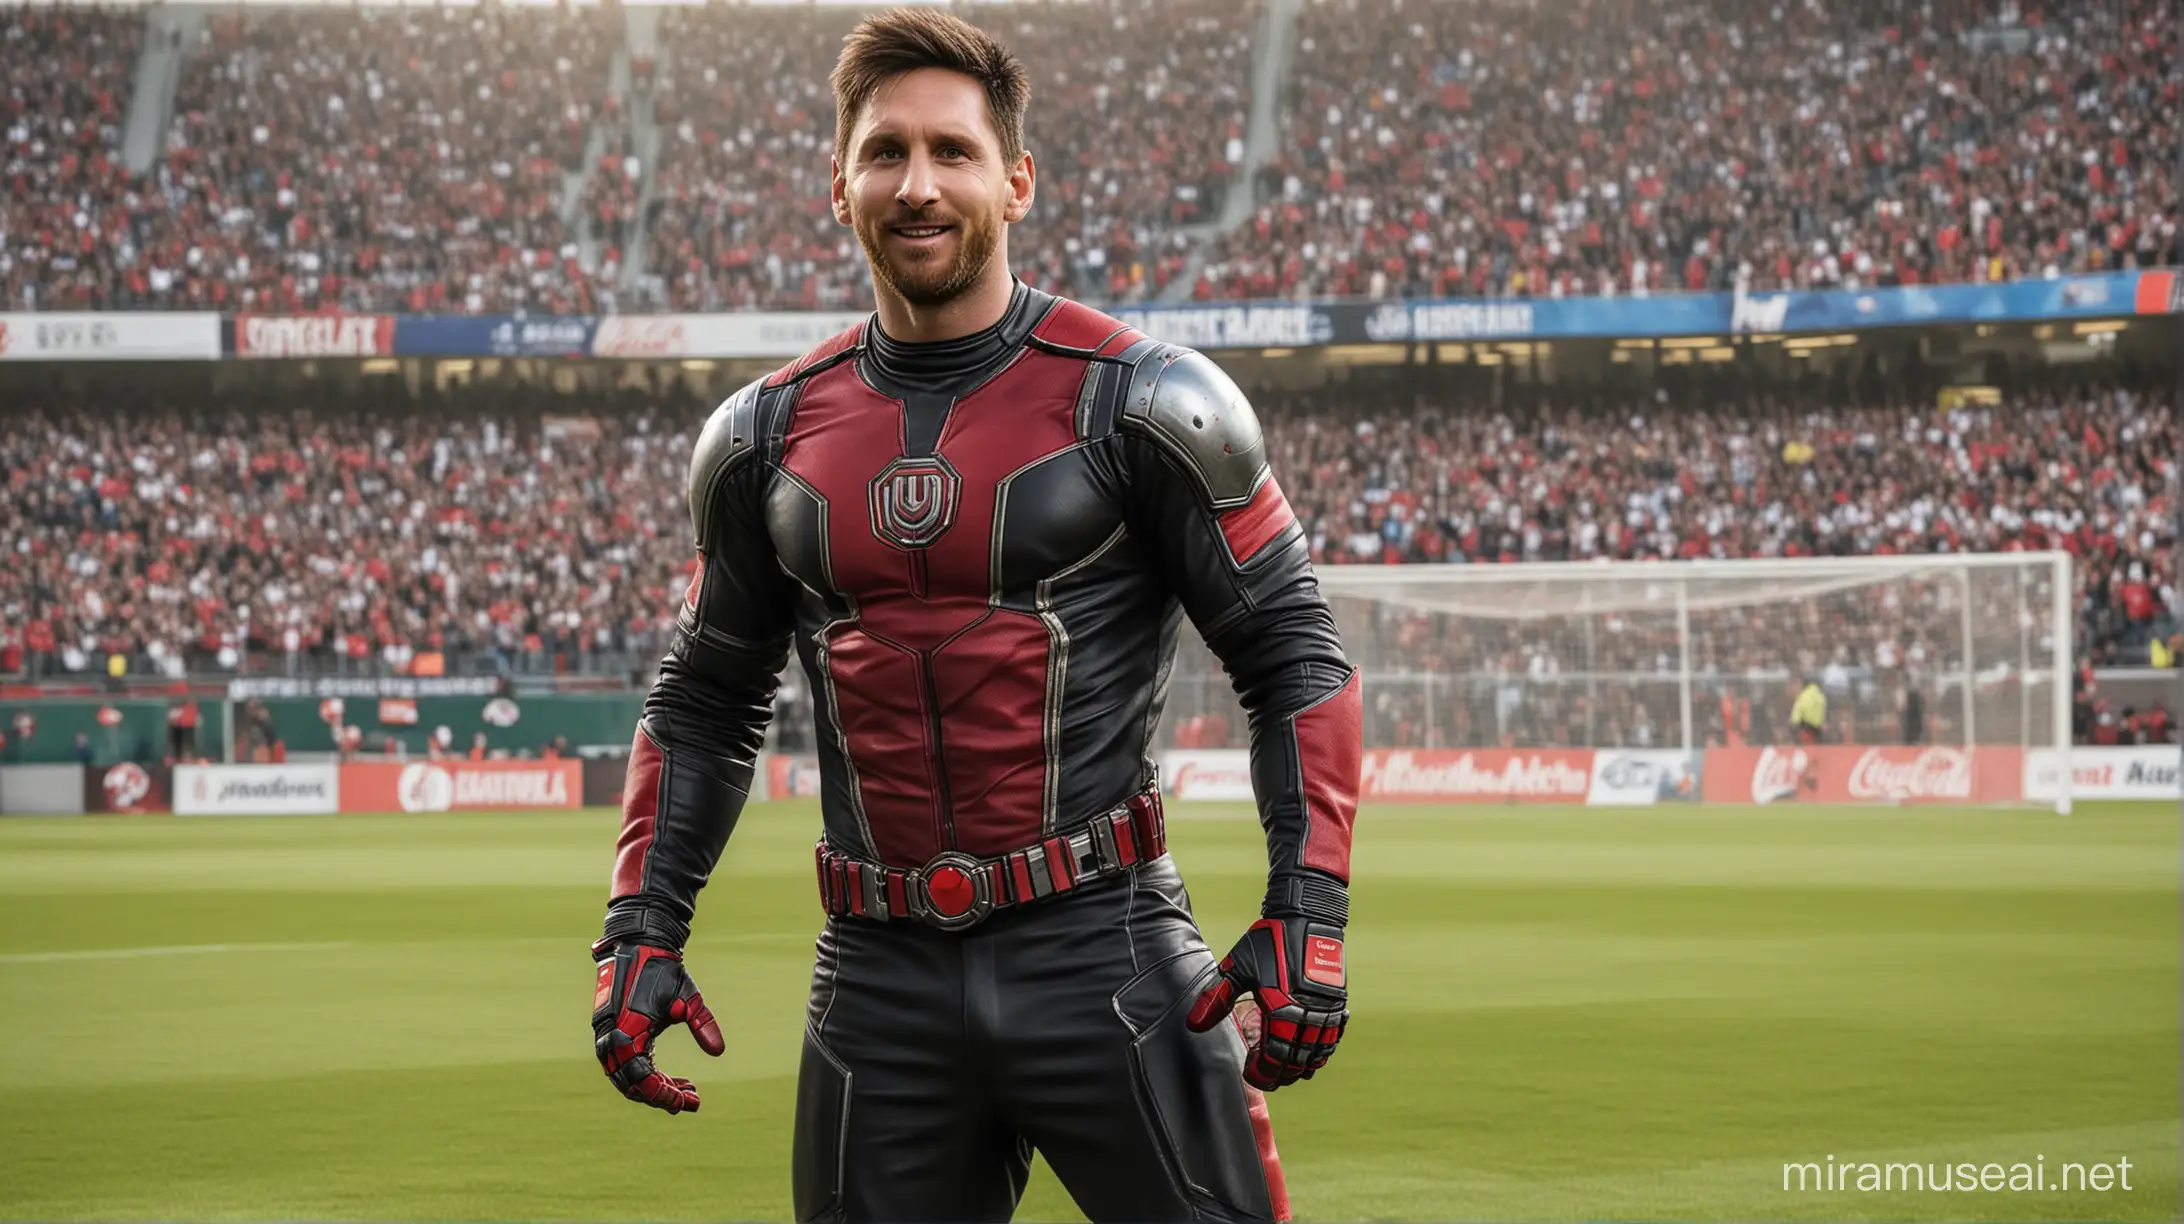 Lionel Messi the Soccer player transformes into the comic book superhero Ant-Man Standin Right in the football field , Super Smiley Face, full body, looking Directly at the Camera, Wearing Ant-Man costume which is red and black, .